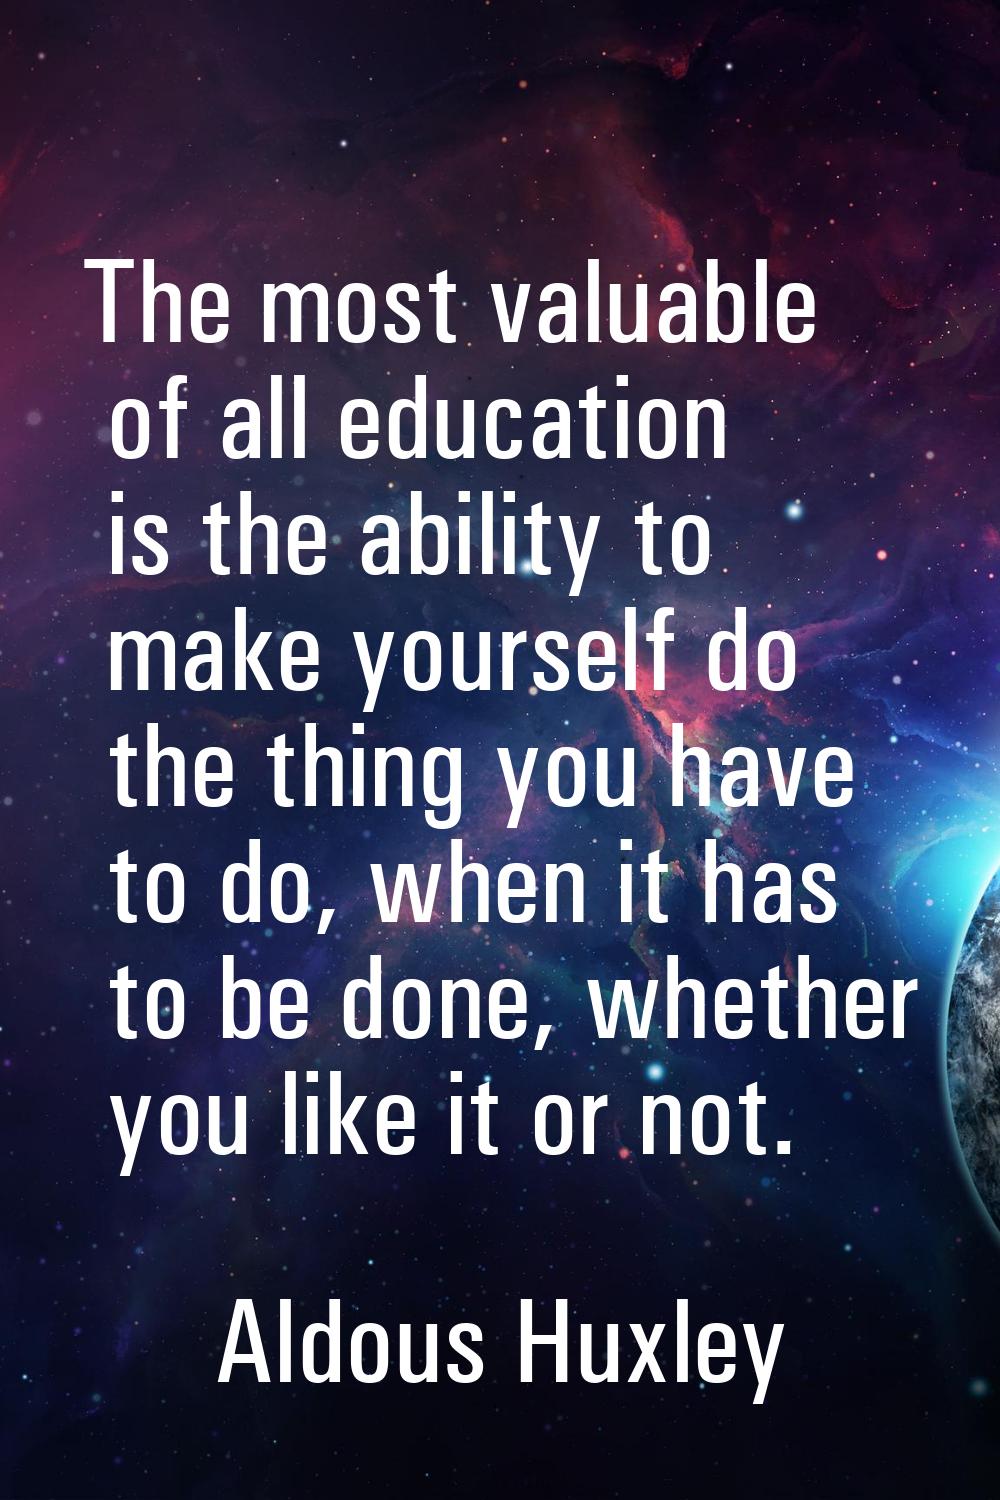 The most valuable of all education is the ability to make yourself do the thing you have to do, whe